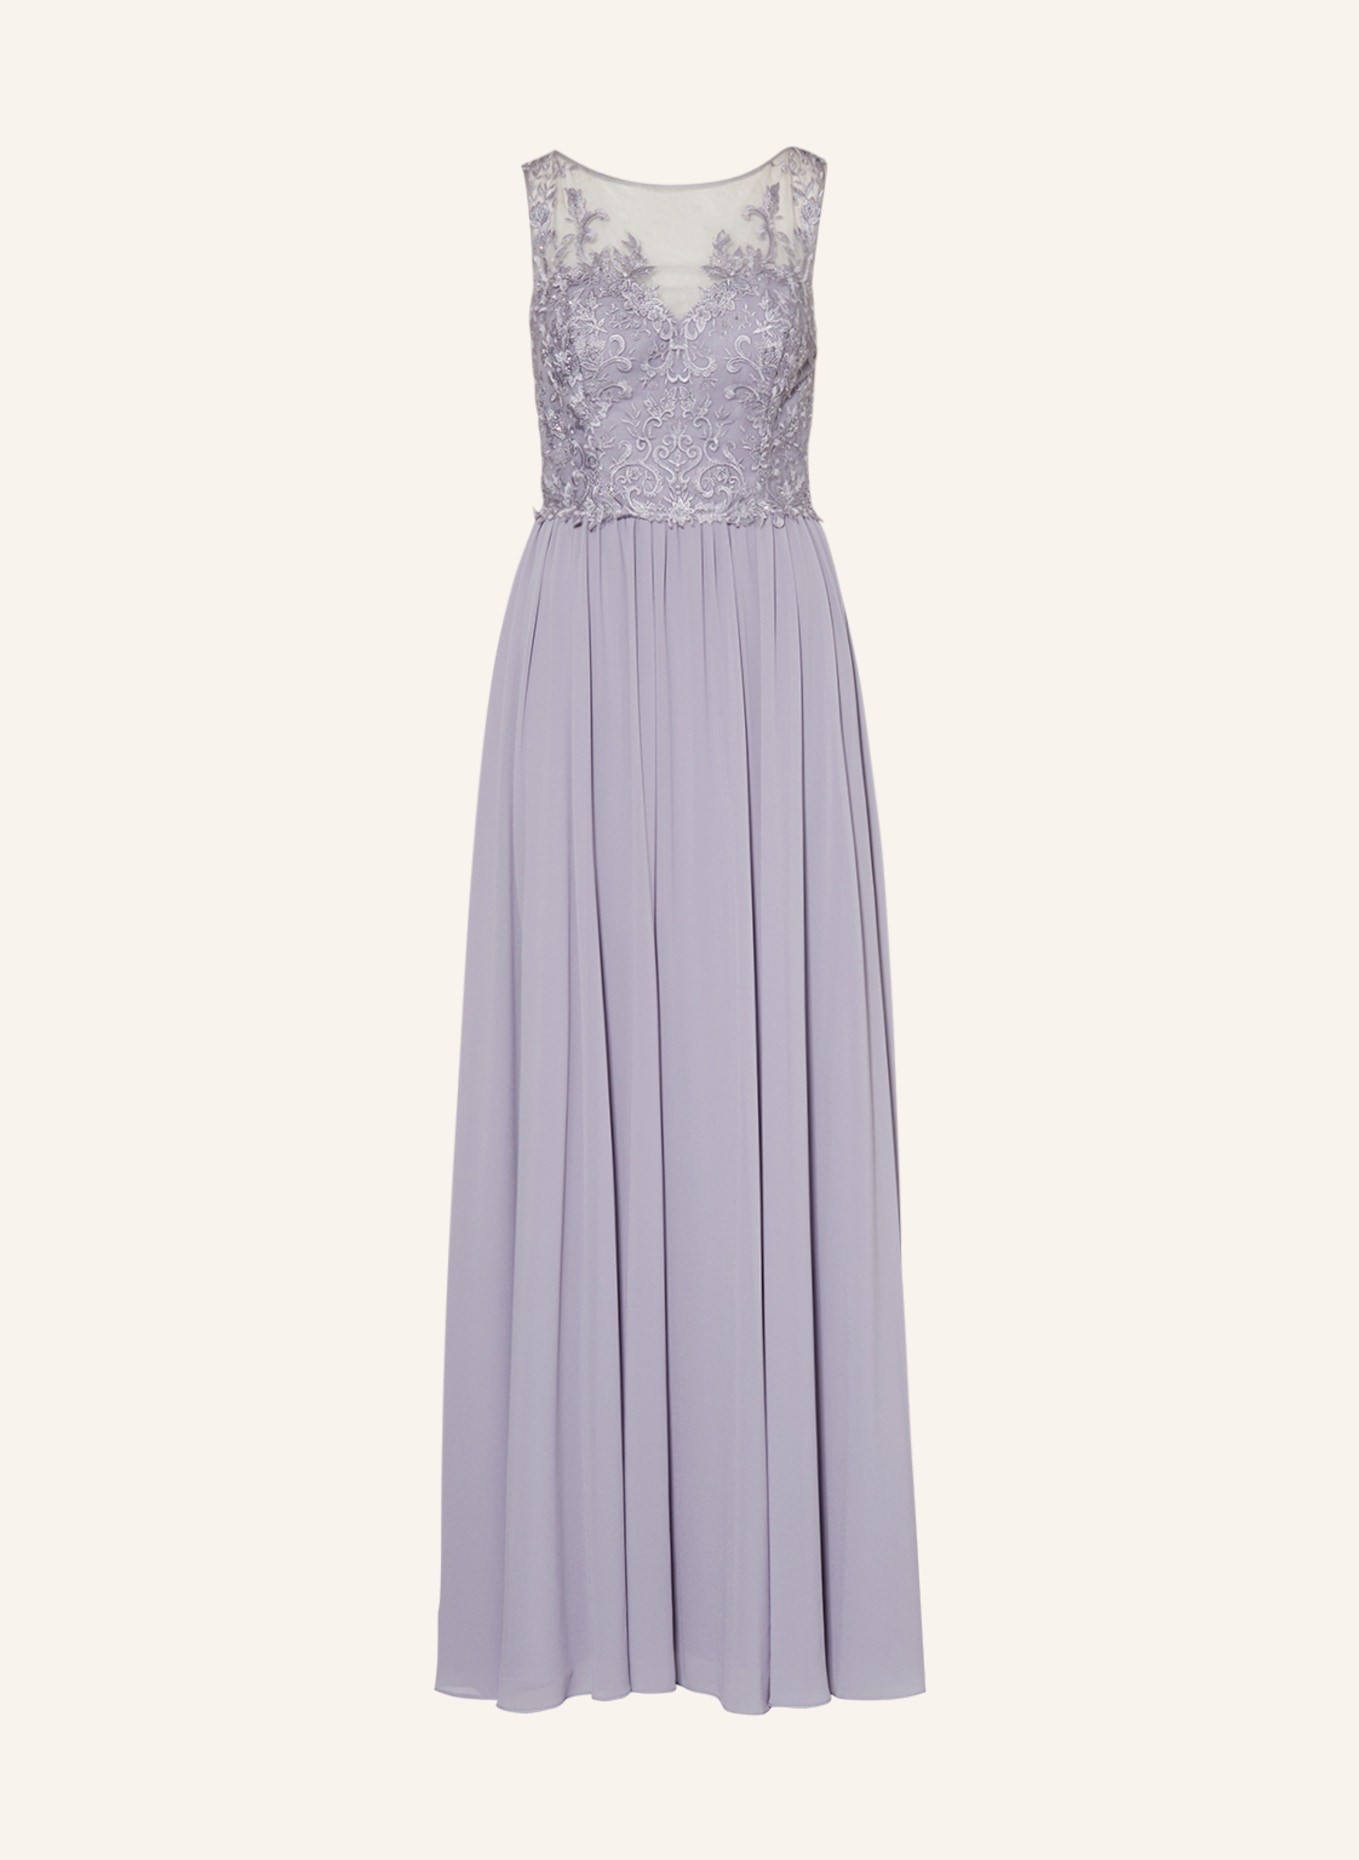 LAONA Evening dress with lace and decorative gems, Color: LIGHT BLUE (Image 1)